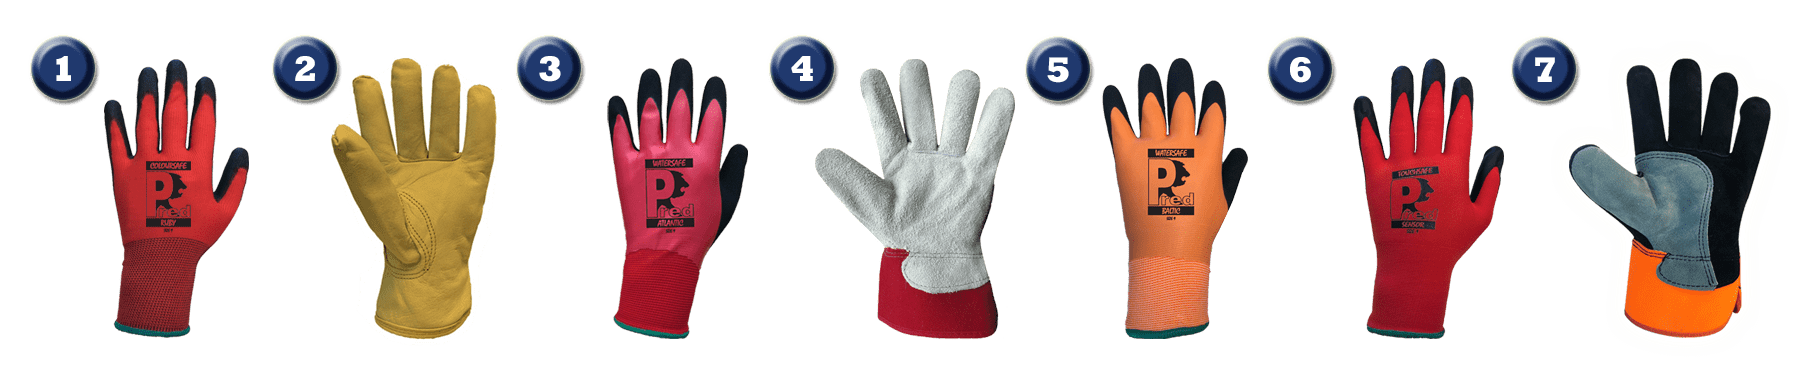 Gloves for use in logistics/warehousing